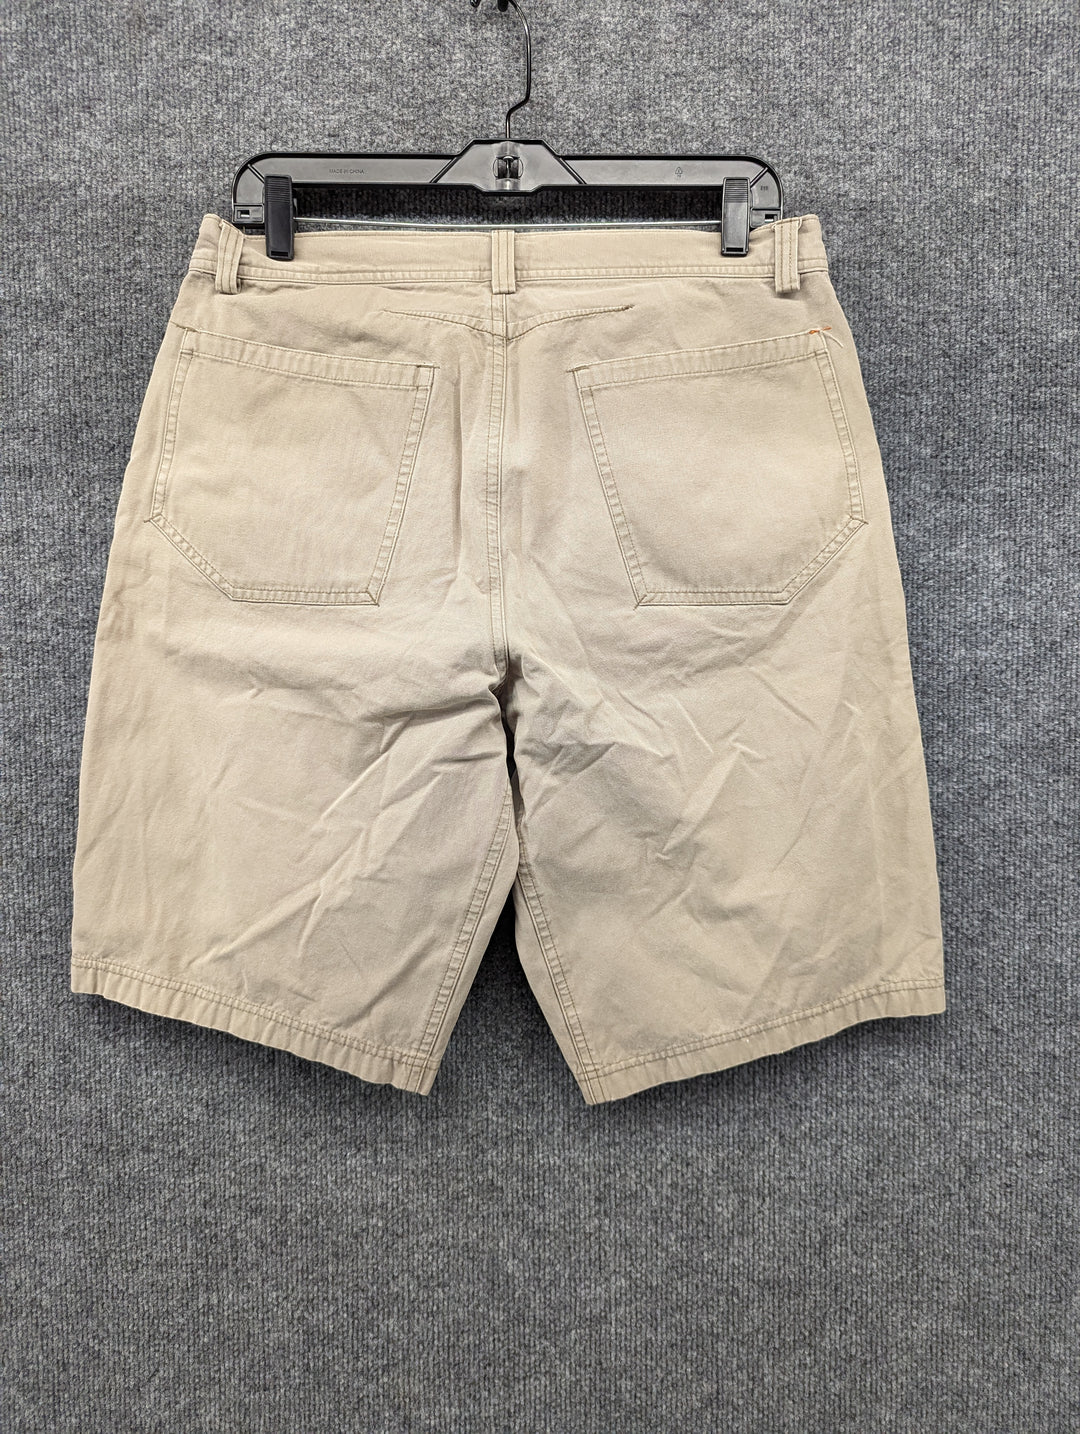 Ibex Size 34 Men's Casual Shorts